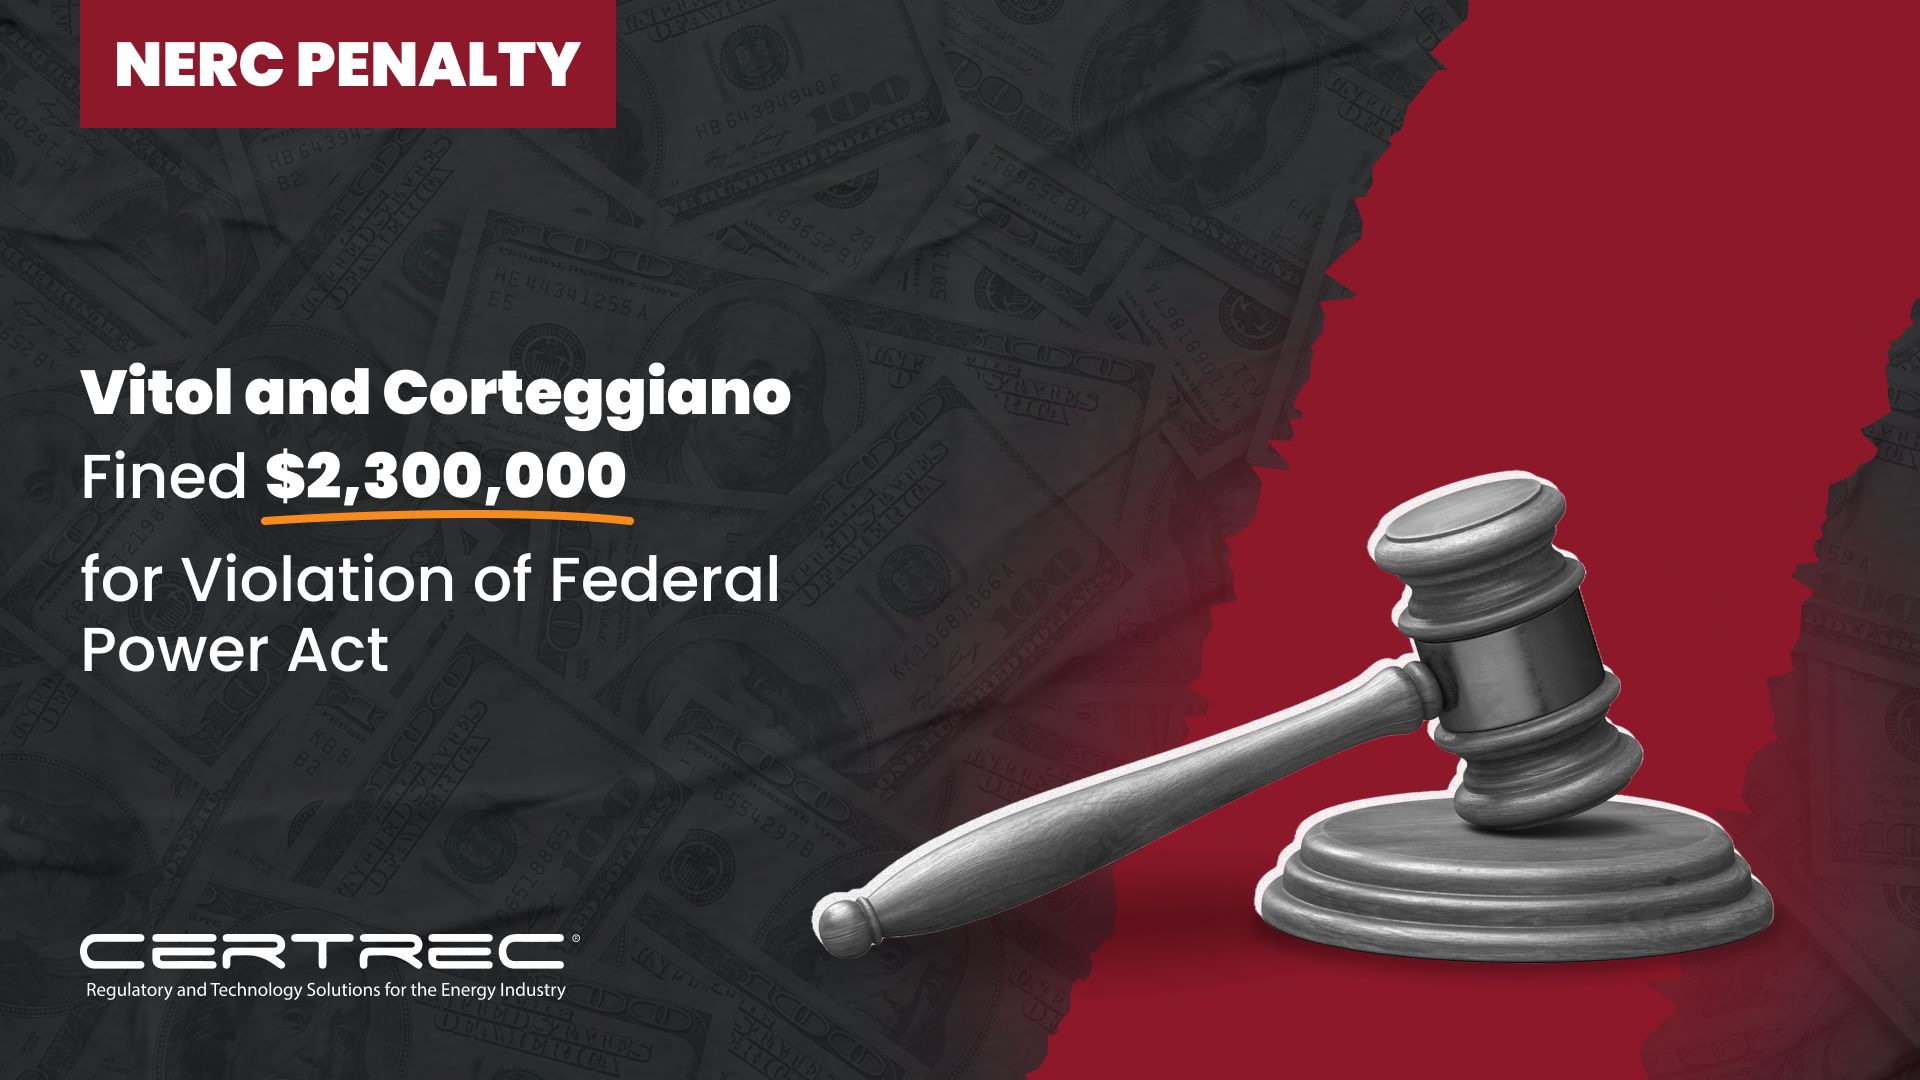 1-Vitol and Corteggiano Fined $2,300,000 for Violation of Federal Power Act - Certrec